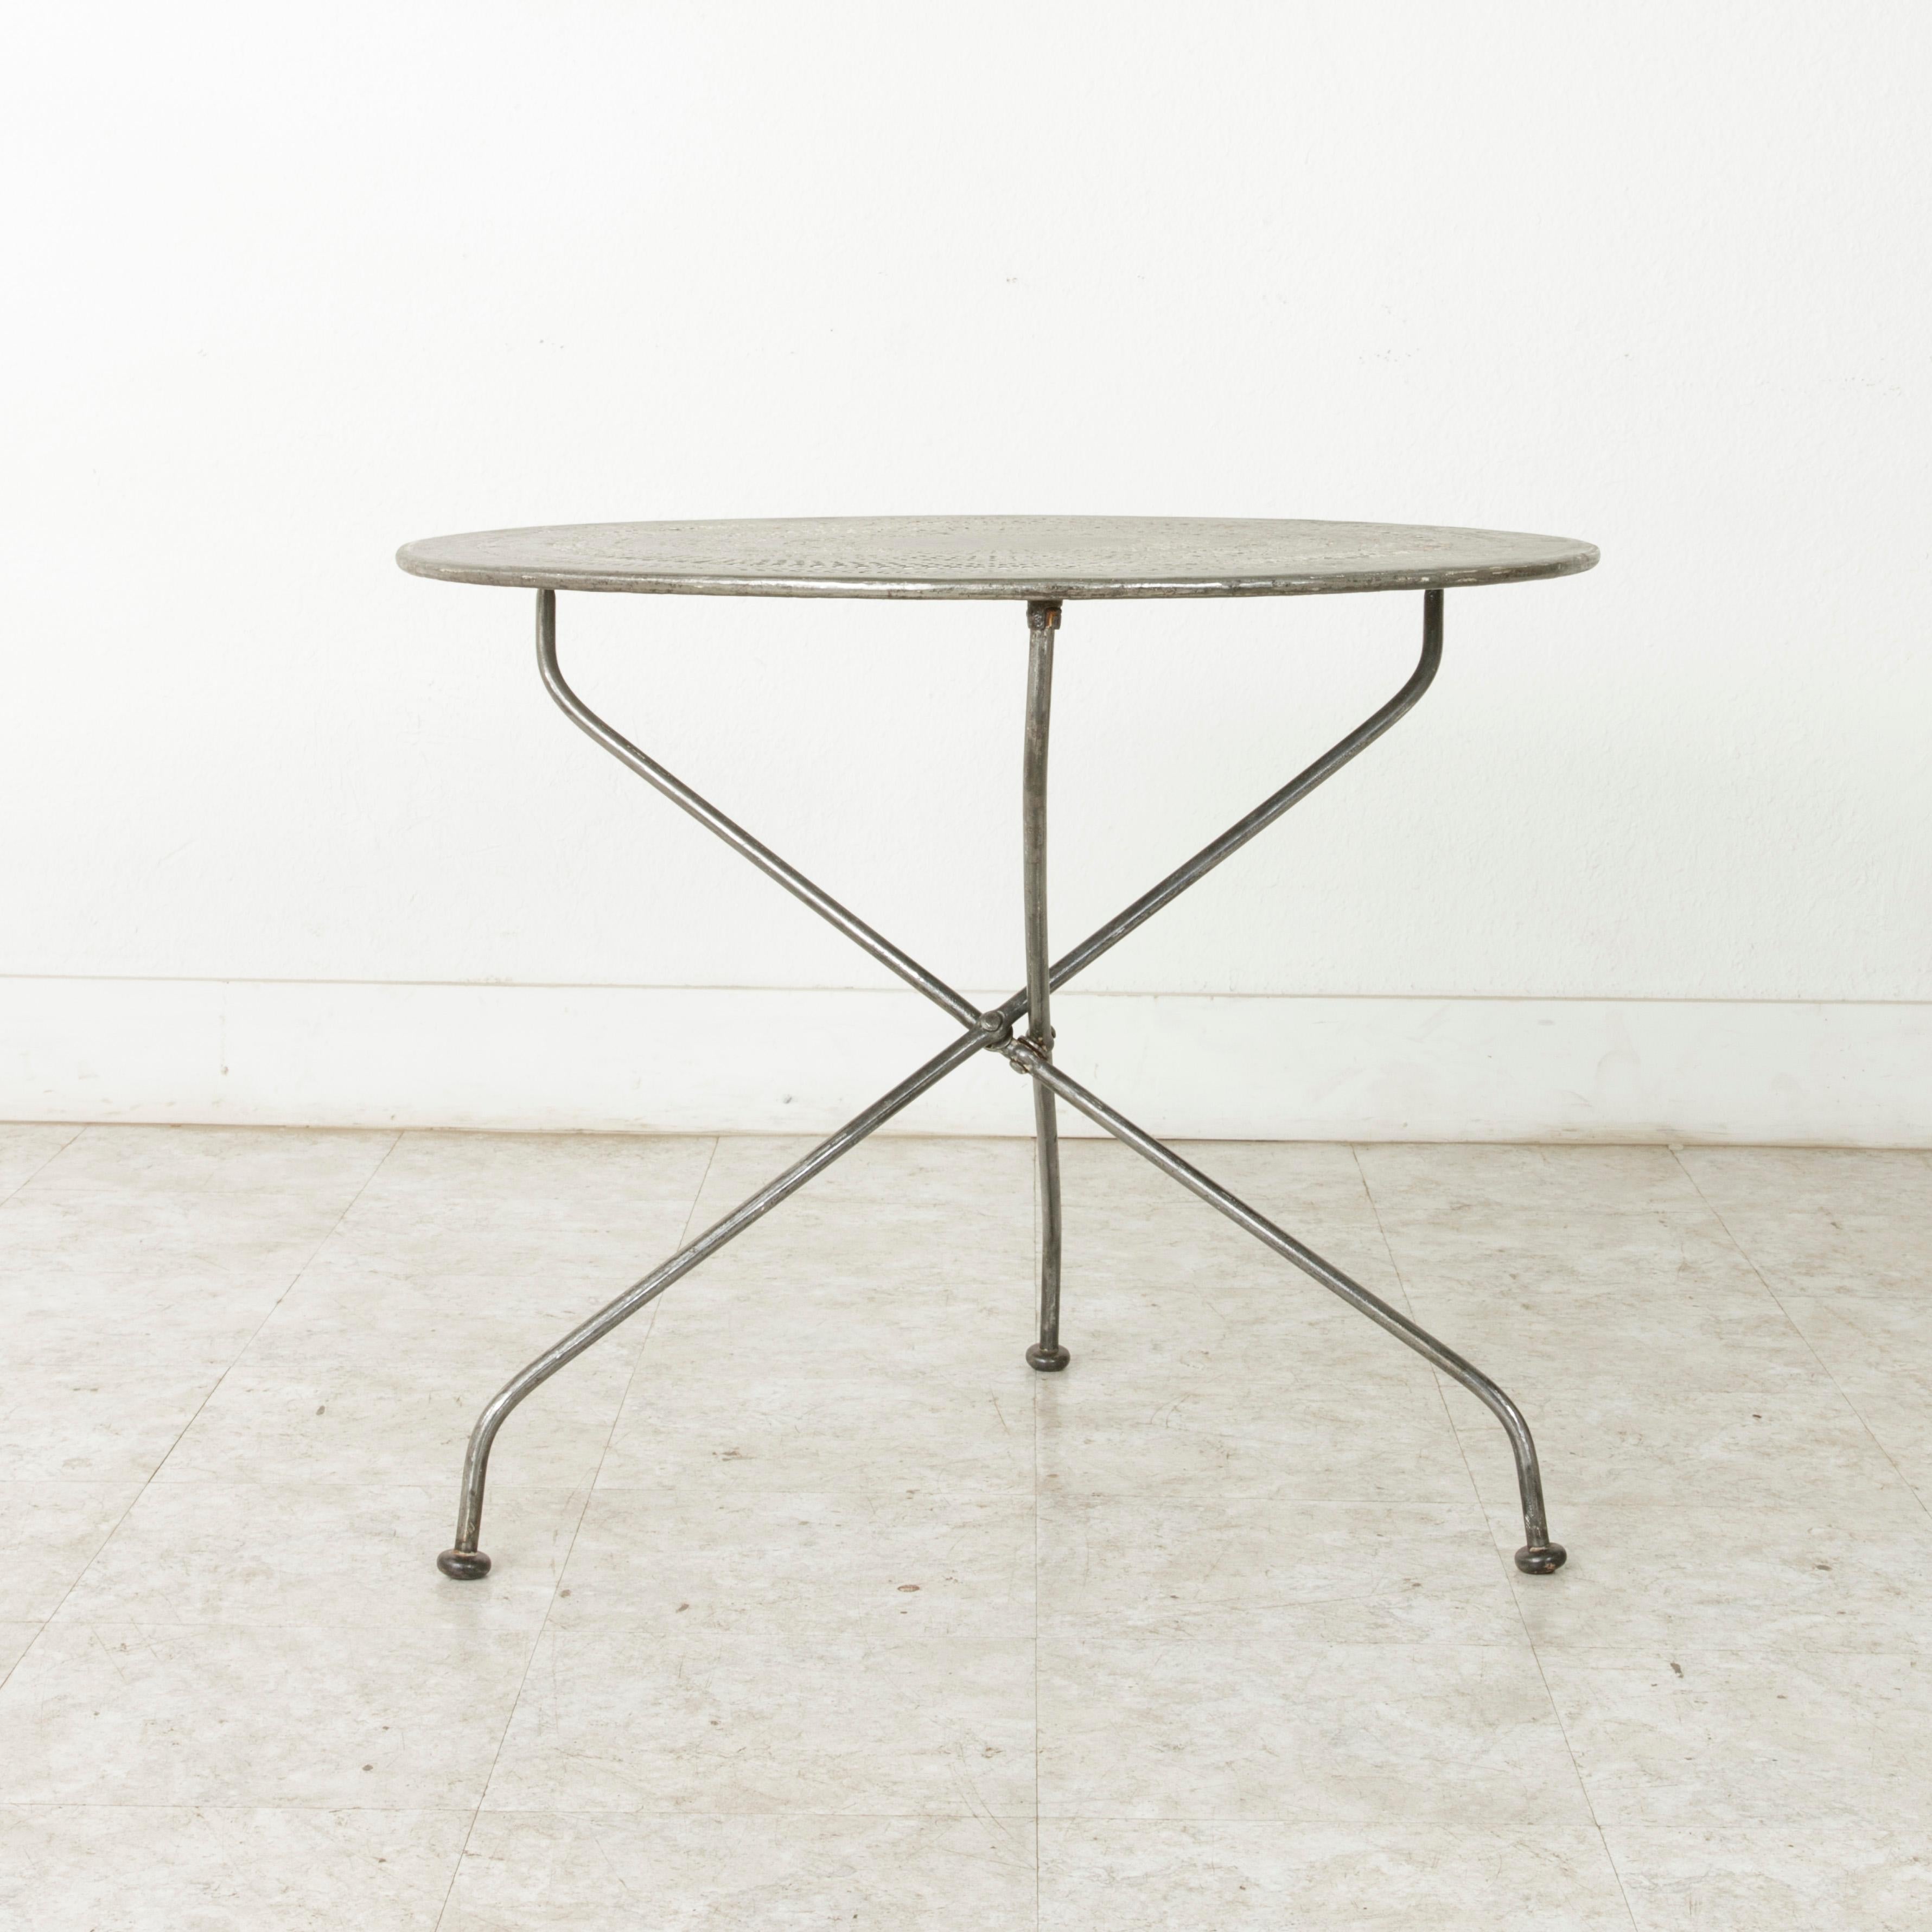 Mid-20th Century French Folding Pierced Metal Outdoor Garden Table, Cafe Table 3